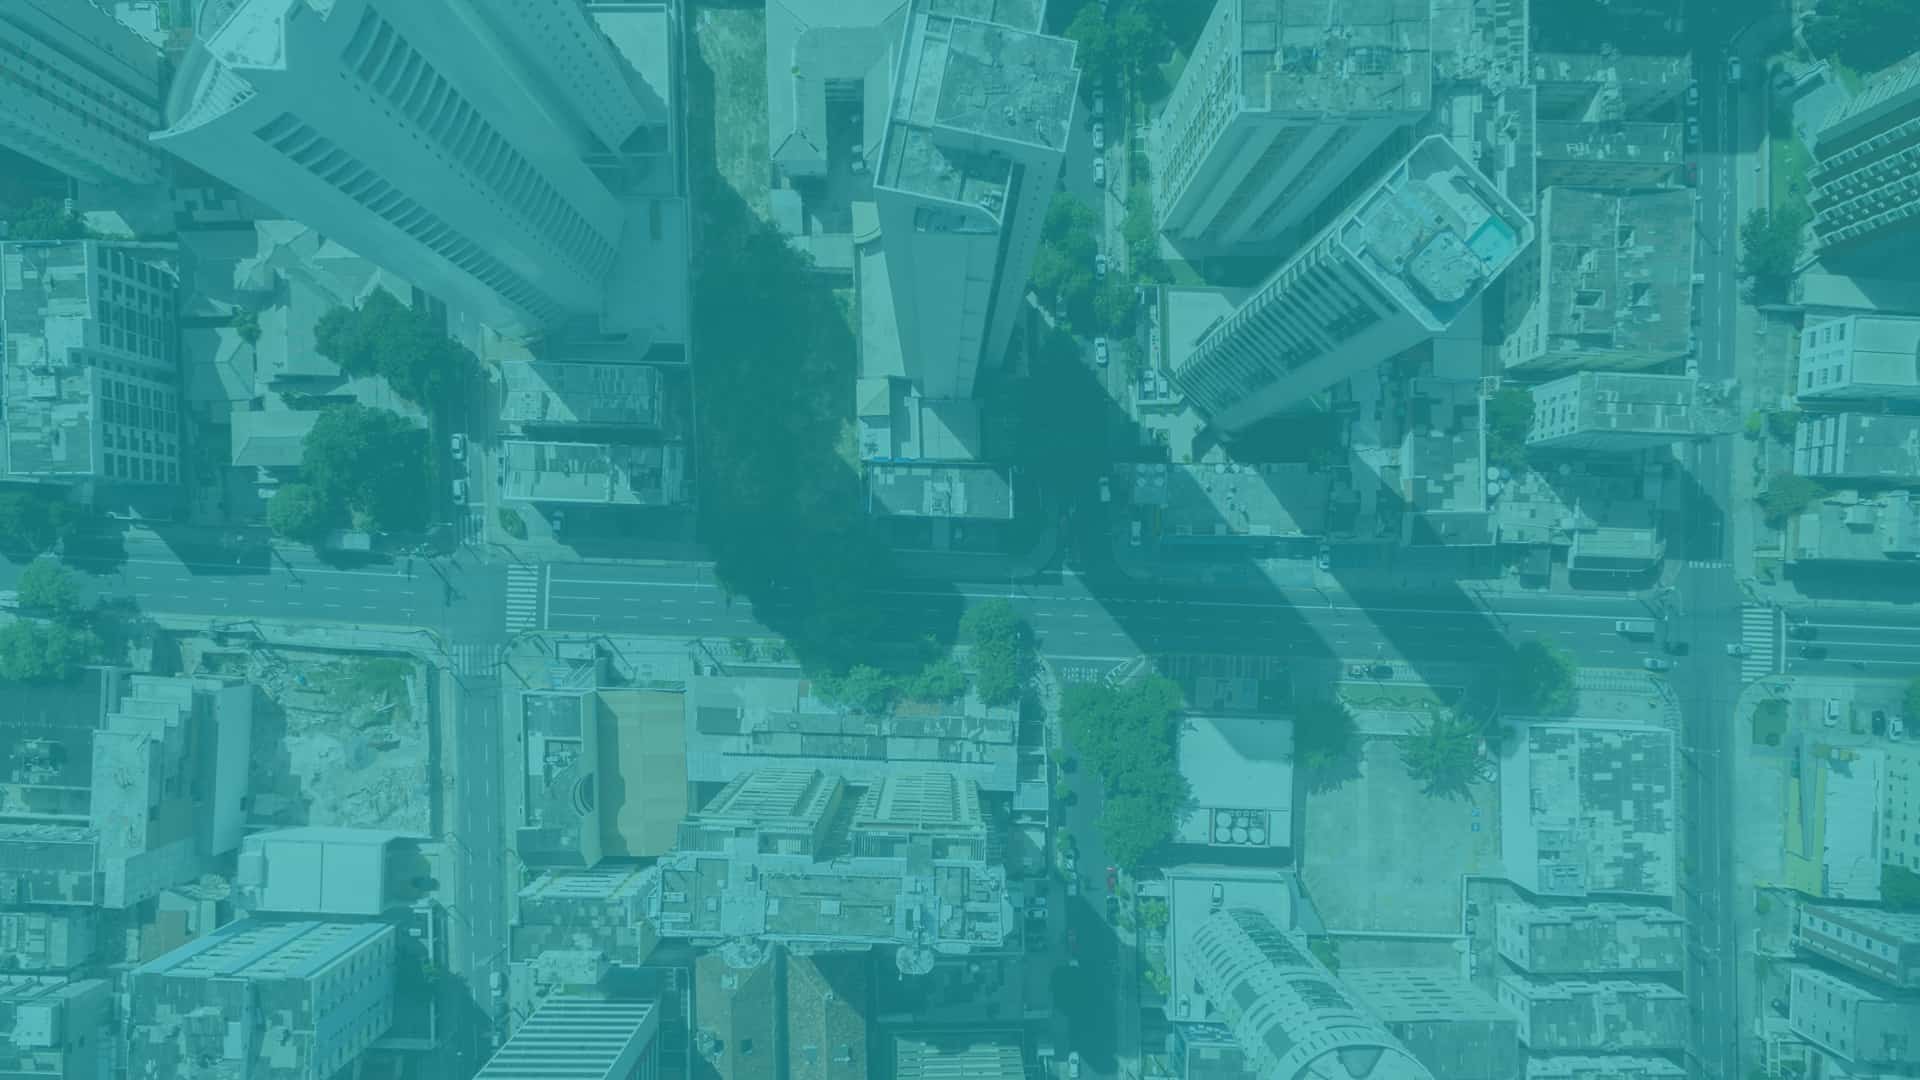 Aerial view of city street taken from a drone 